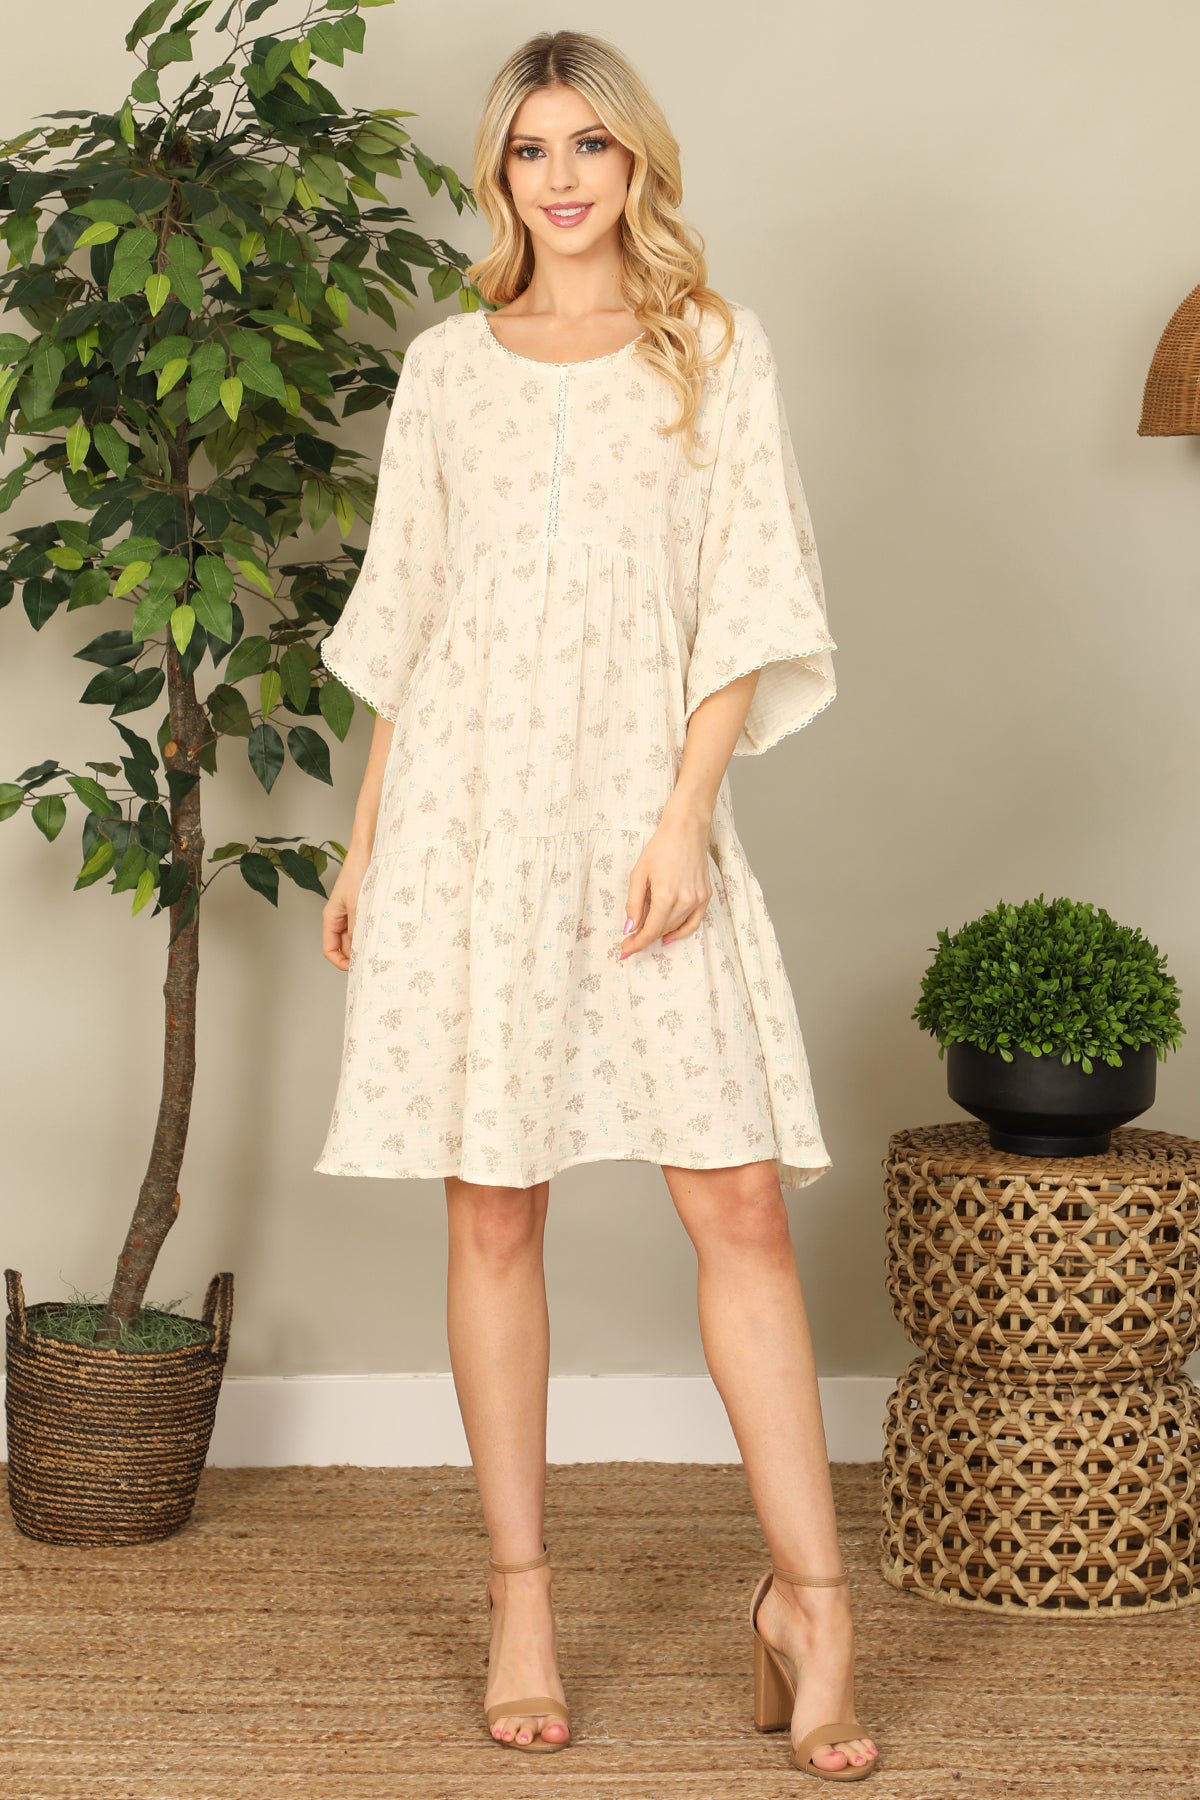 CREAM BROWN BELL SLEEVE BOAT NECK FLORAL DRESS 2-2-1